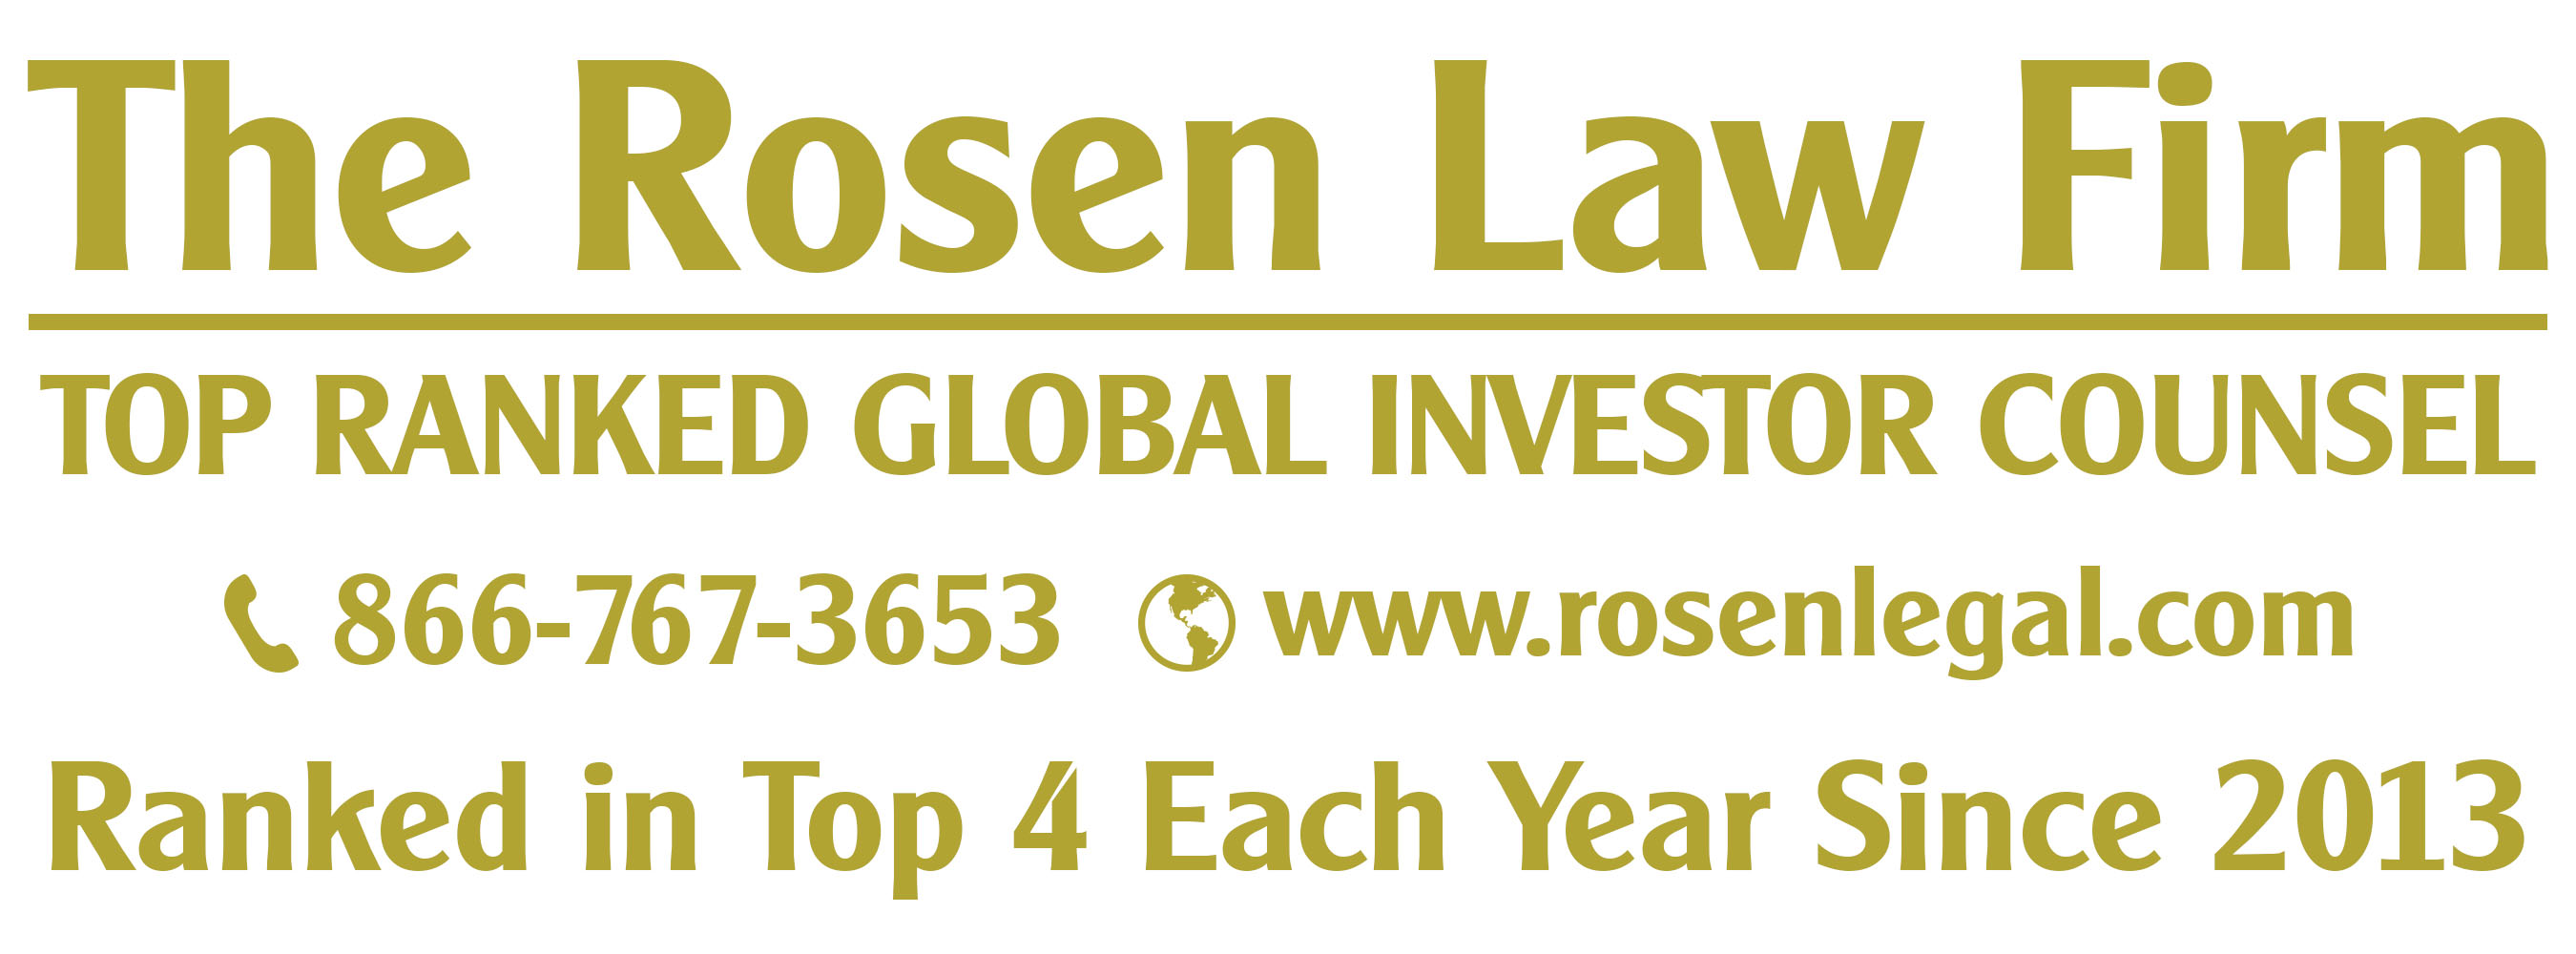 Rosen Law Firm PA, Saturday October 8, 2022 Image of press release